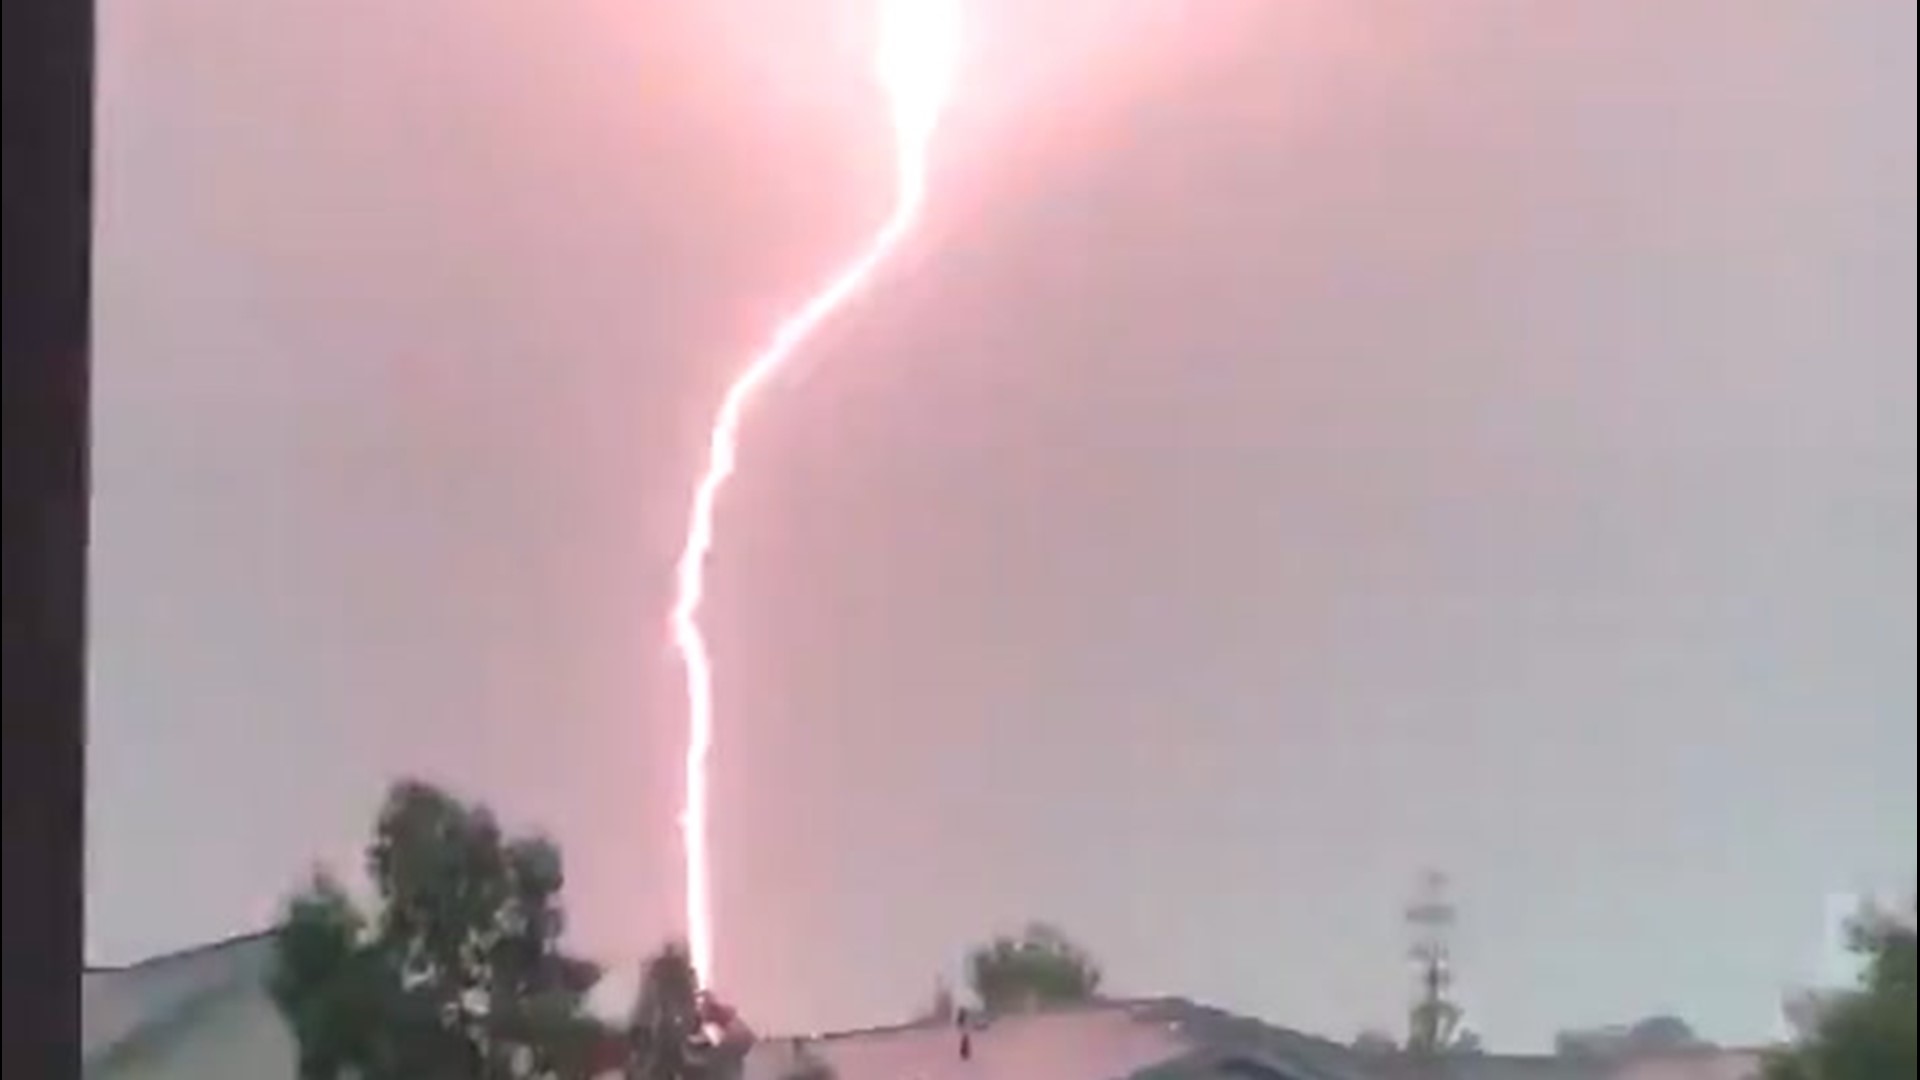 Lightning struck very close to a neighborhood in Delaware County, Pennsylvania, on Aug. 7, followed by loud thunder.